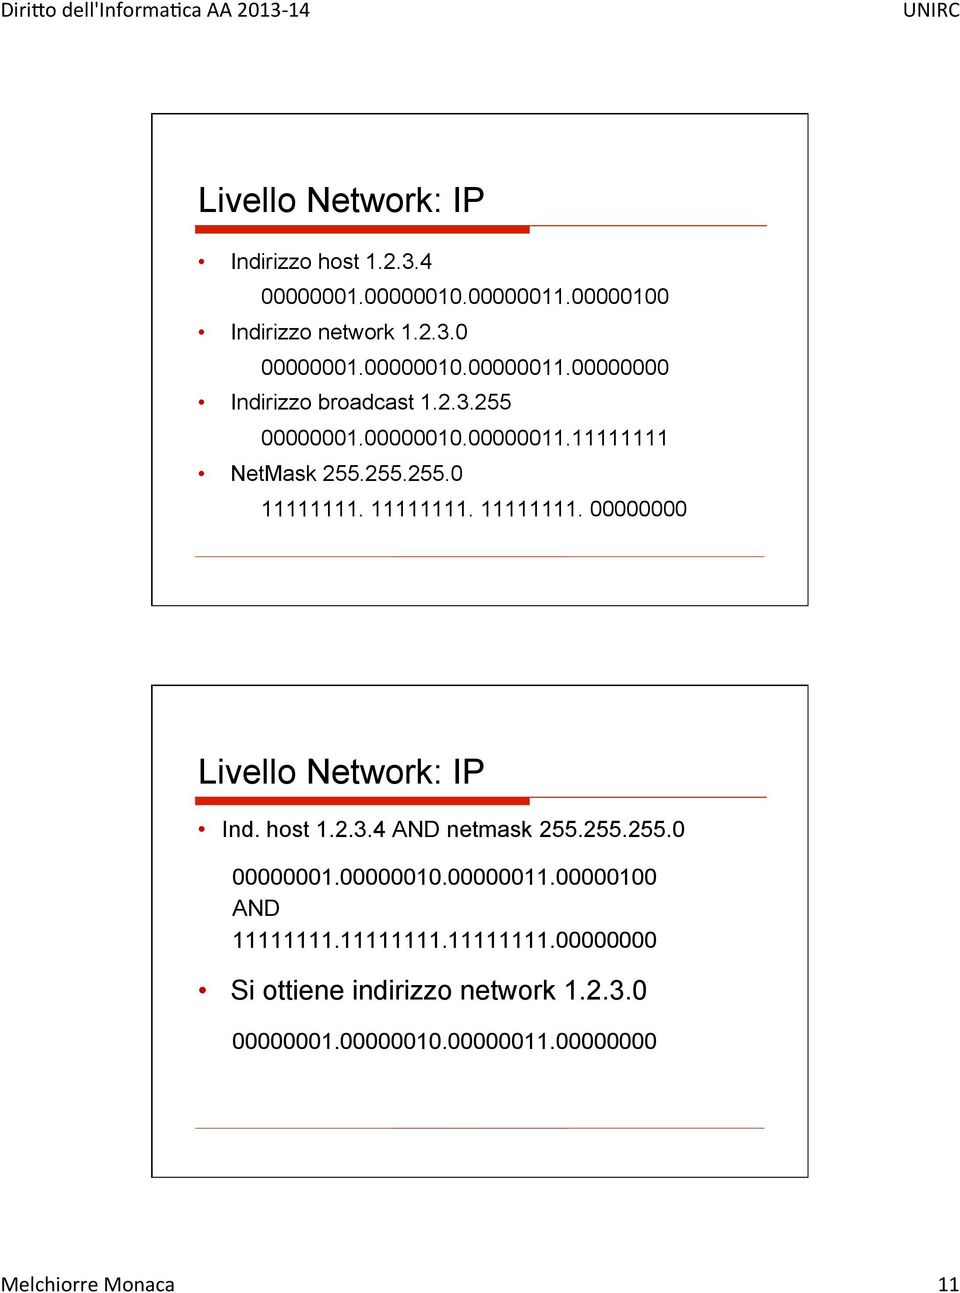 11111111. 11111111. 00000000 Livello Network: IP! Ind. host 1.2.3.4 AND netmask 255.255.255.0 00000001.00000010.00000011.